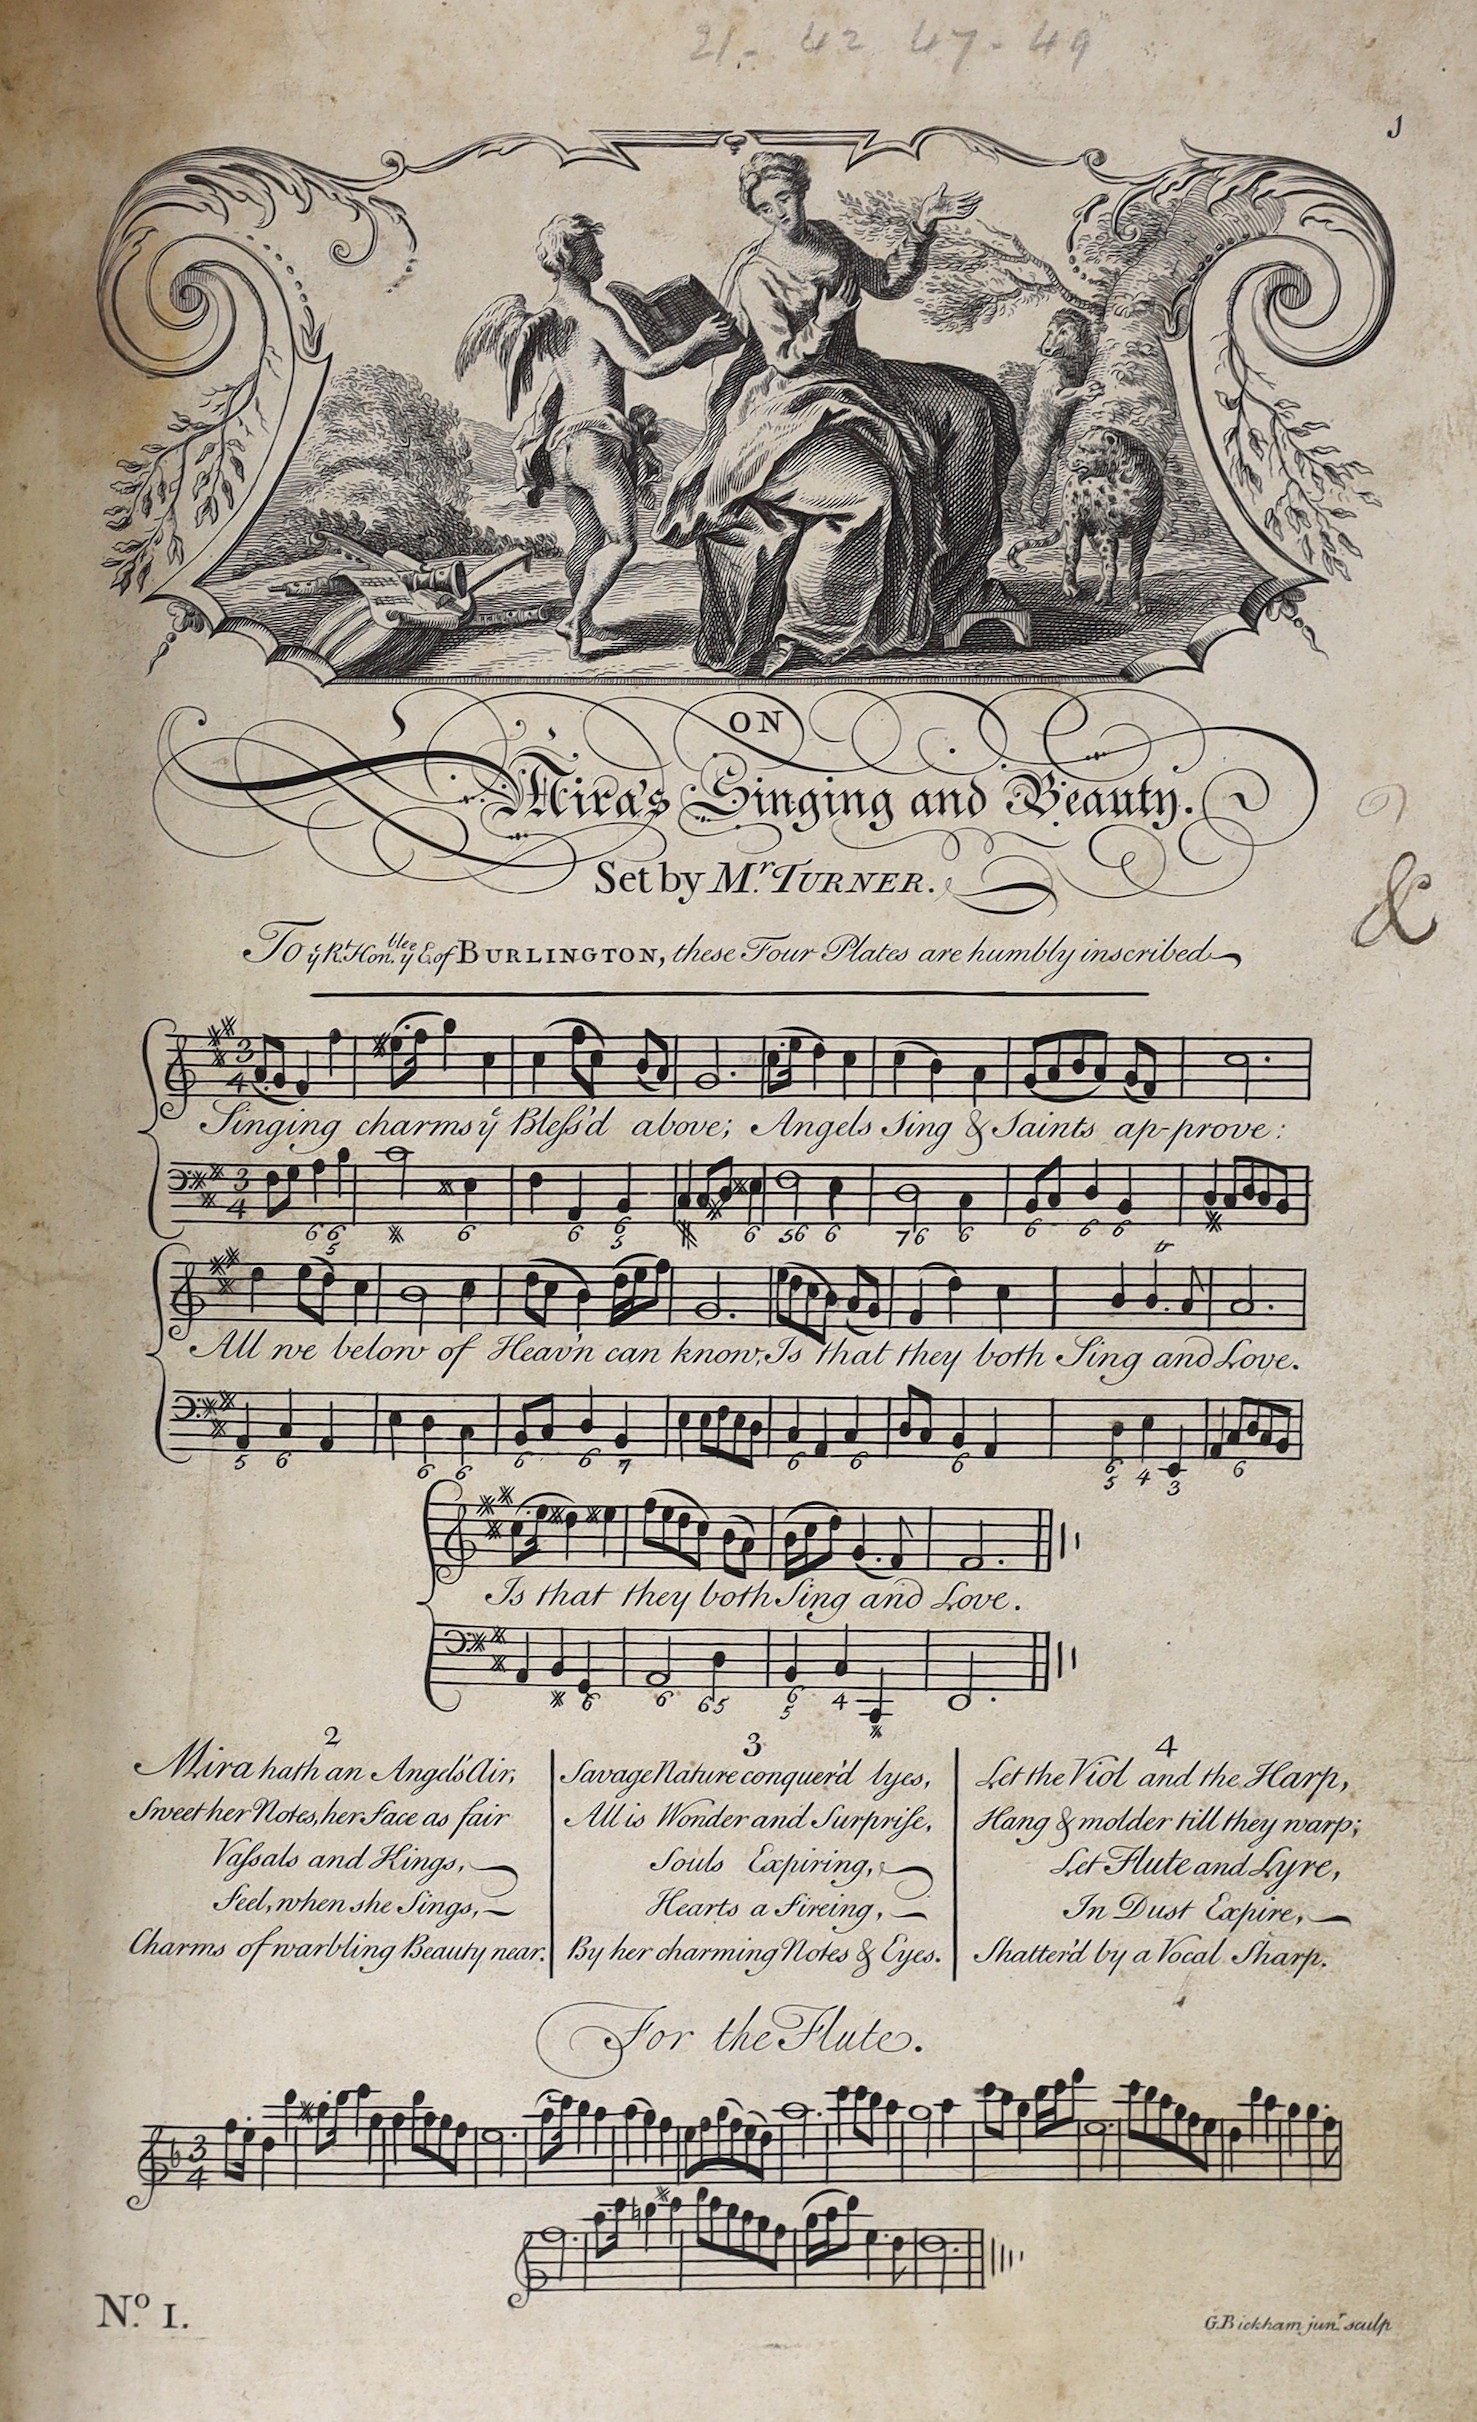 (Bickham, George - The Musical Entertainer). vol. 1 (only, of 2), without title and prelims. 99 (ex.100) engraved leaves of songs (words and music) with pictorial and decorative vignette at head of each; rebound 19th cen